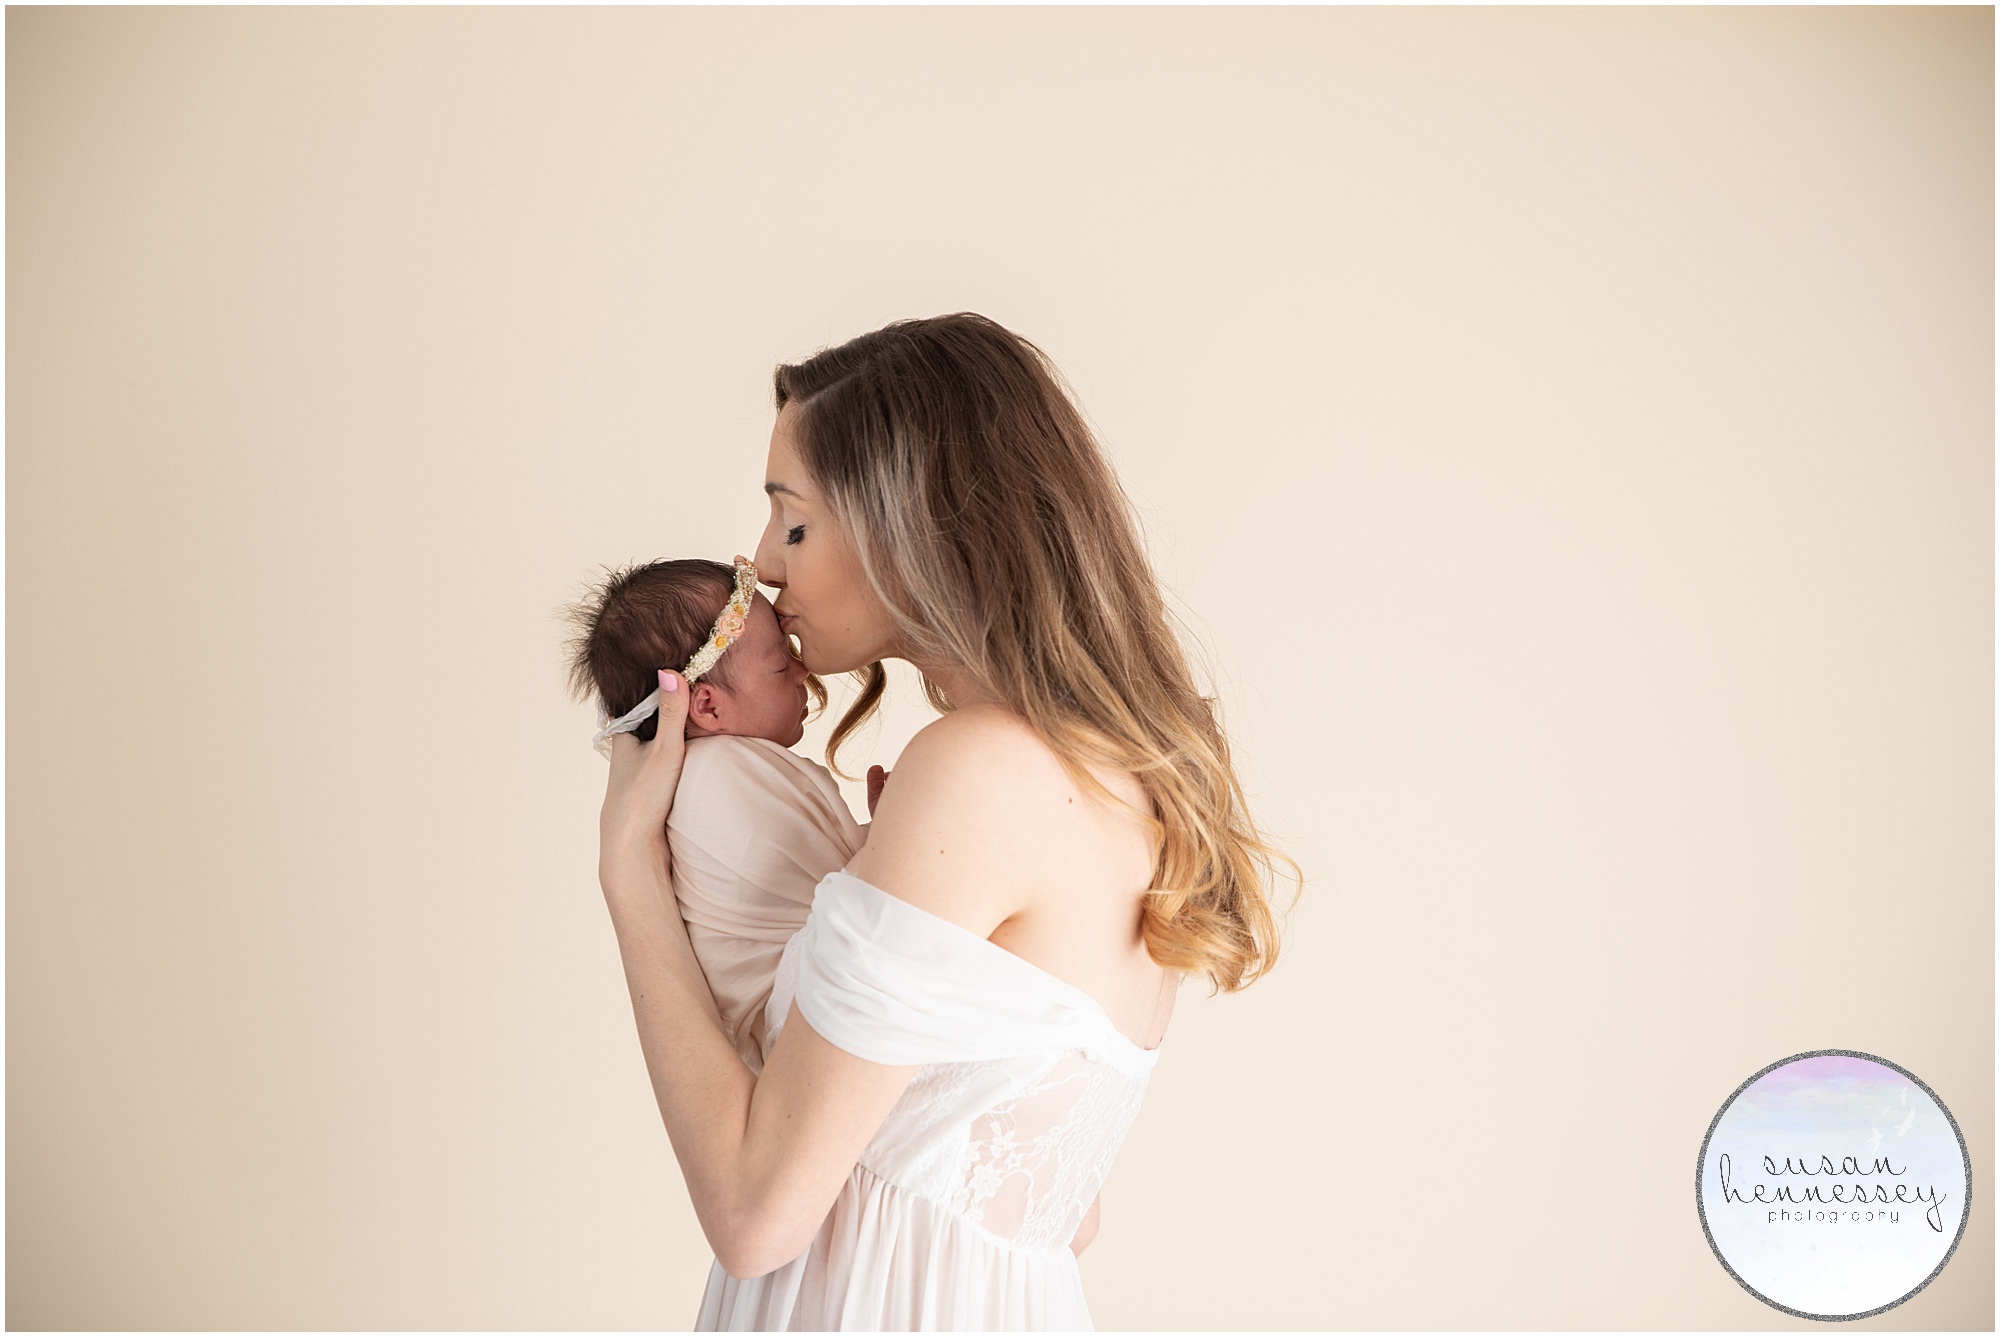 Bump to Baby Collection includes an in studio newborn session.